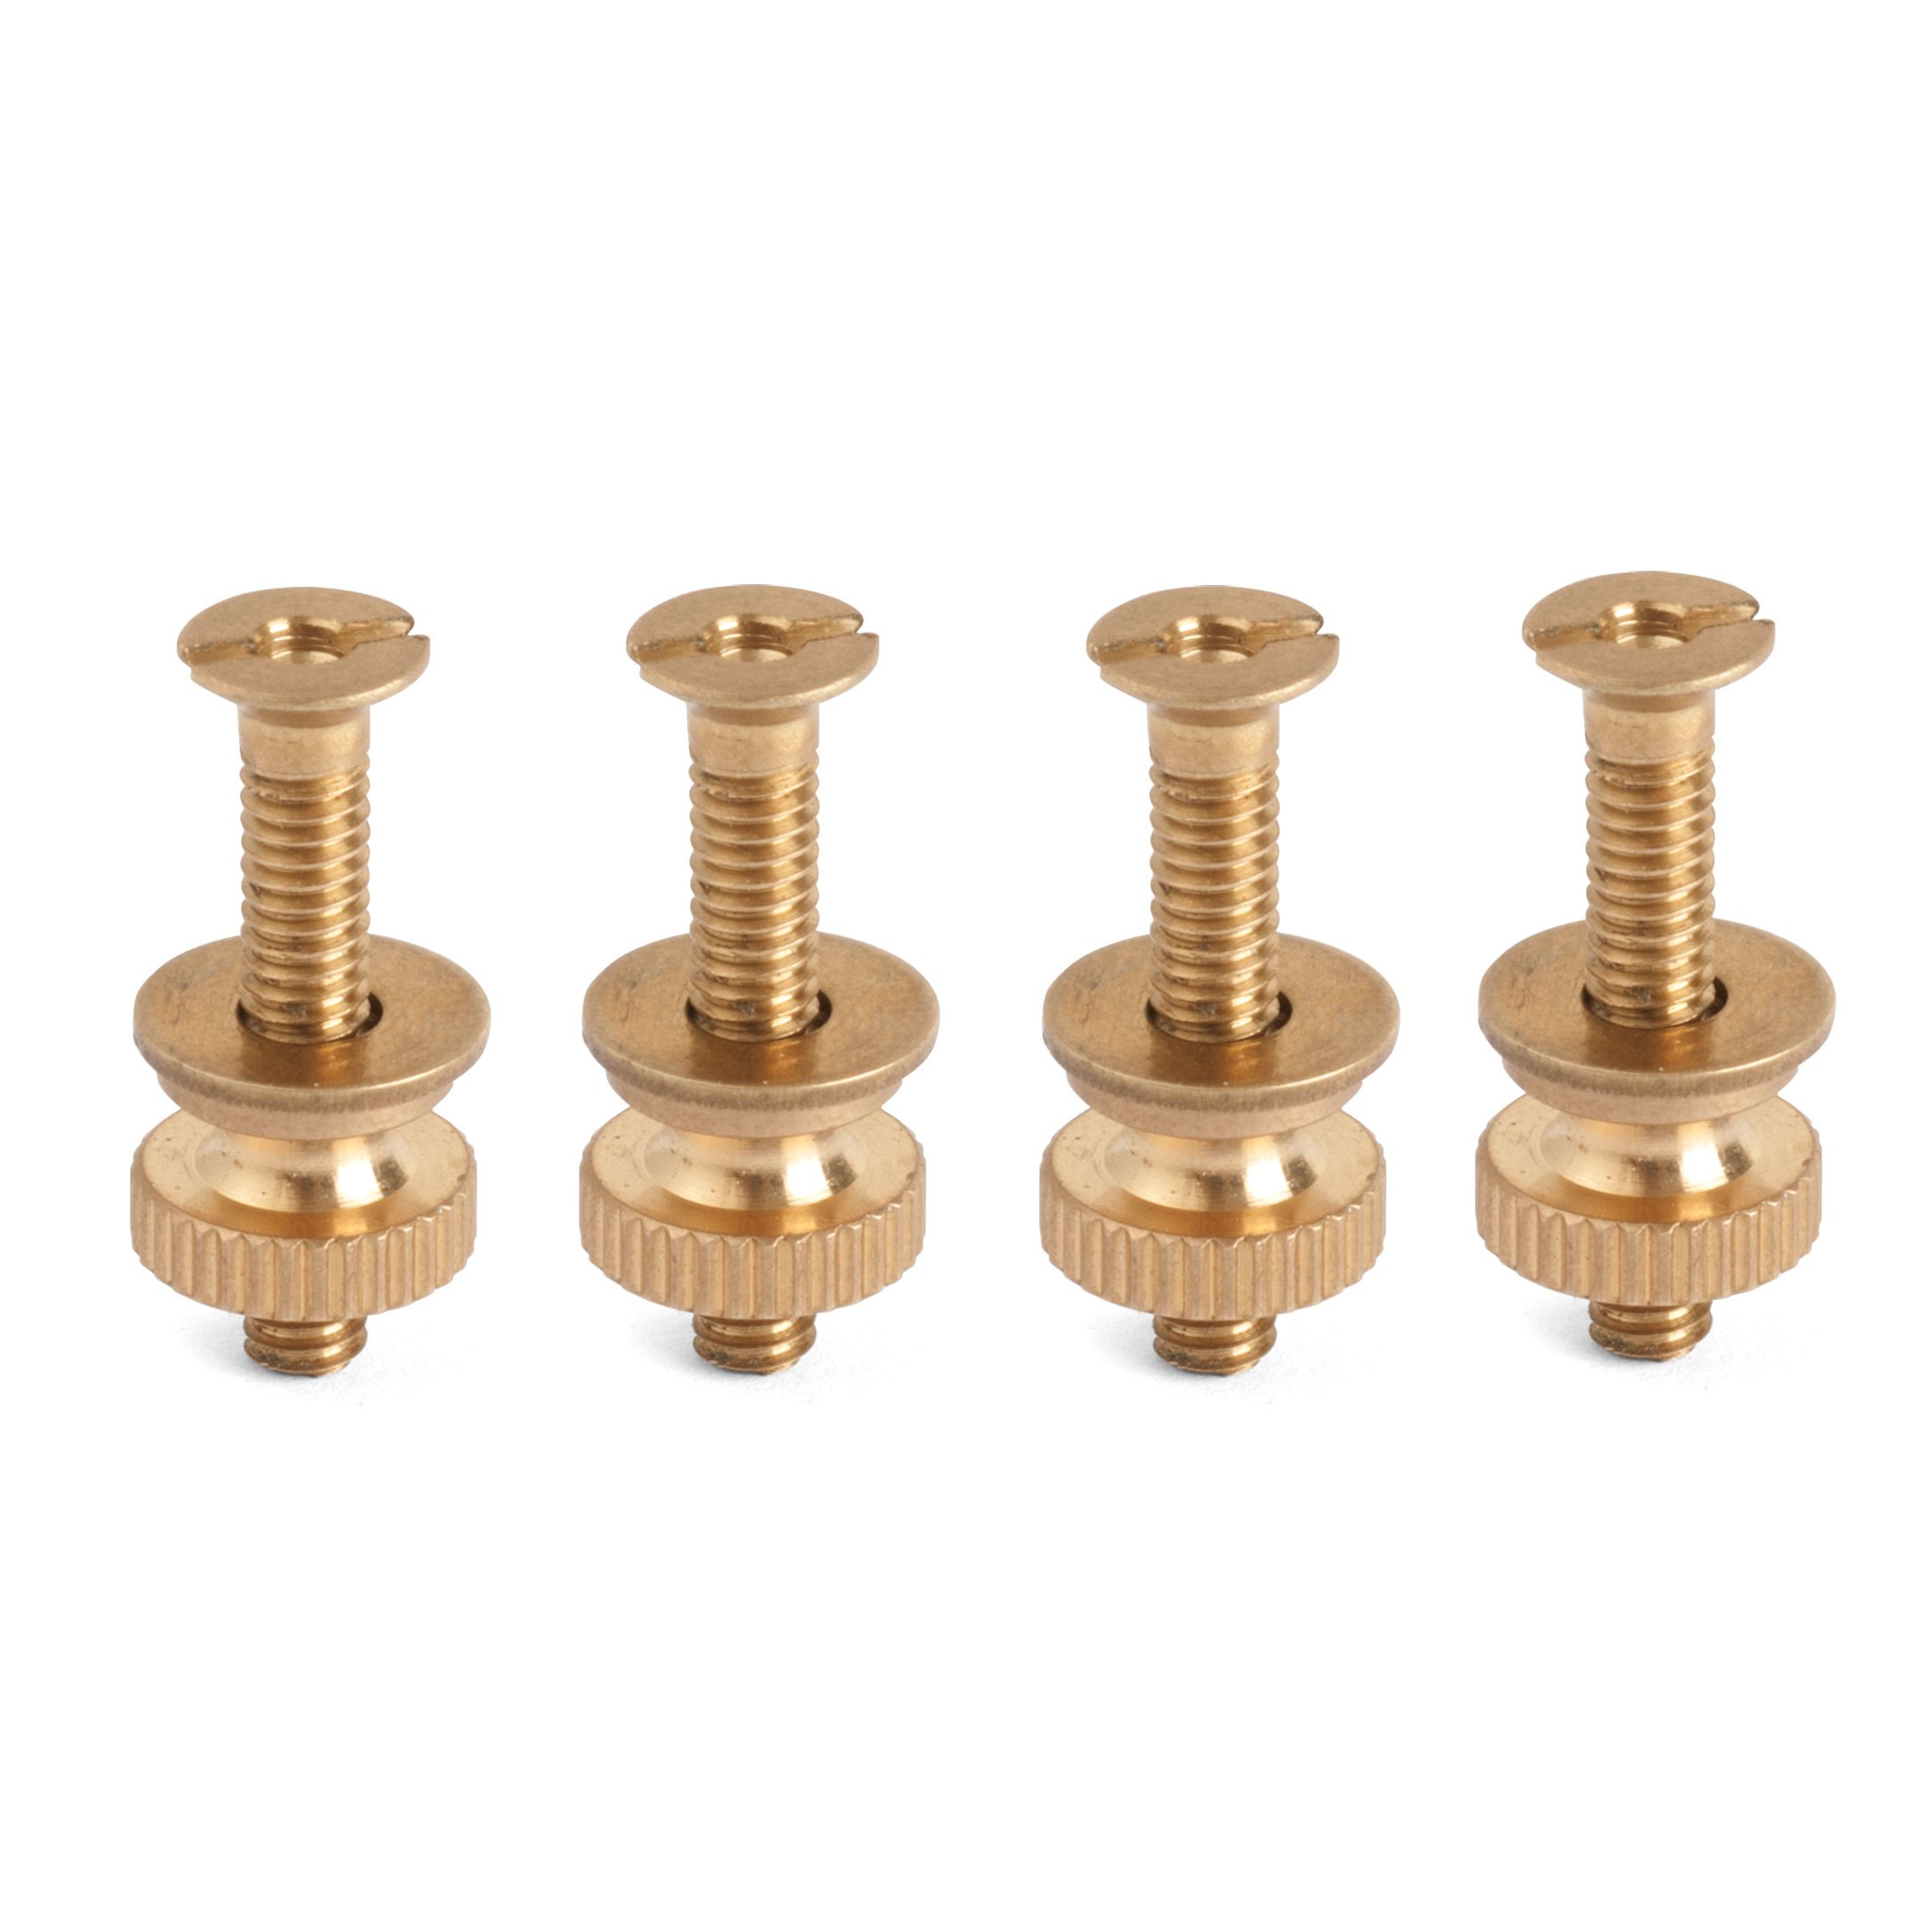 Acoustic Bridge Bolts, Package of 4